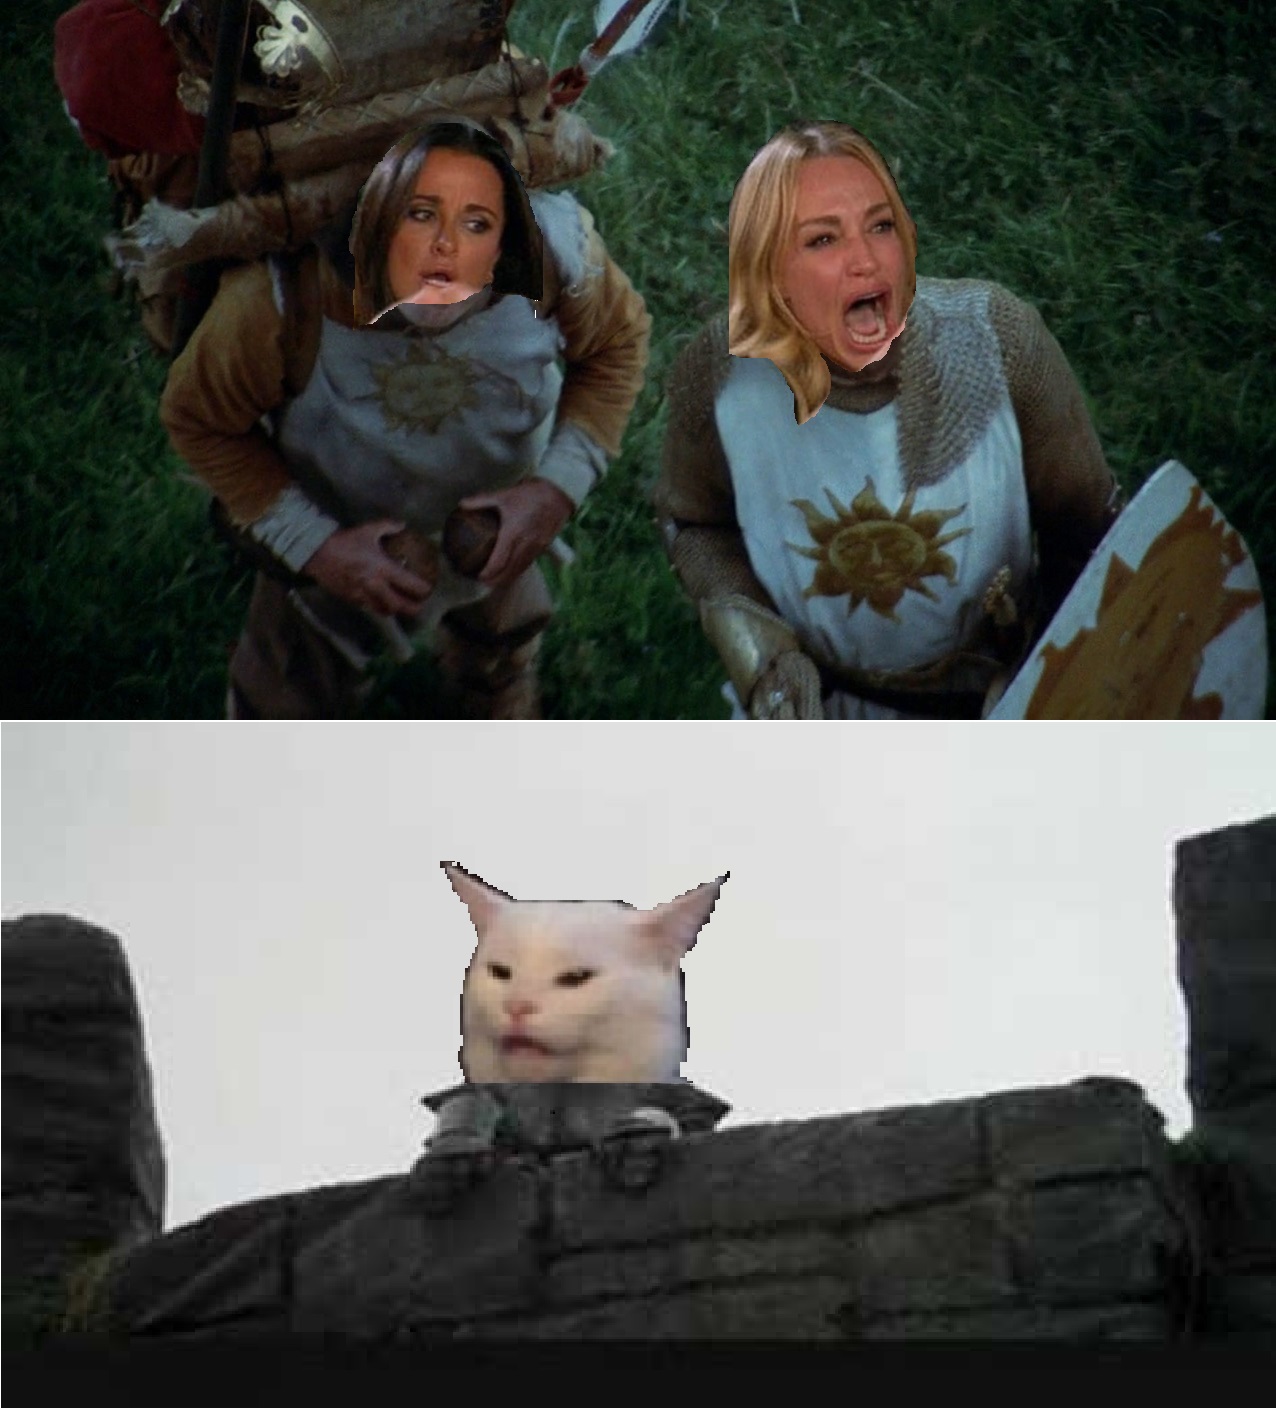 monty python and the holy grail woman yelling at cat meme